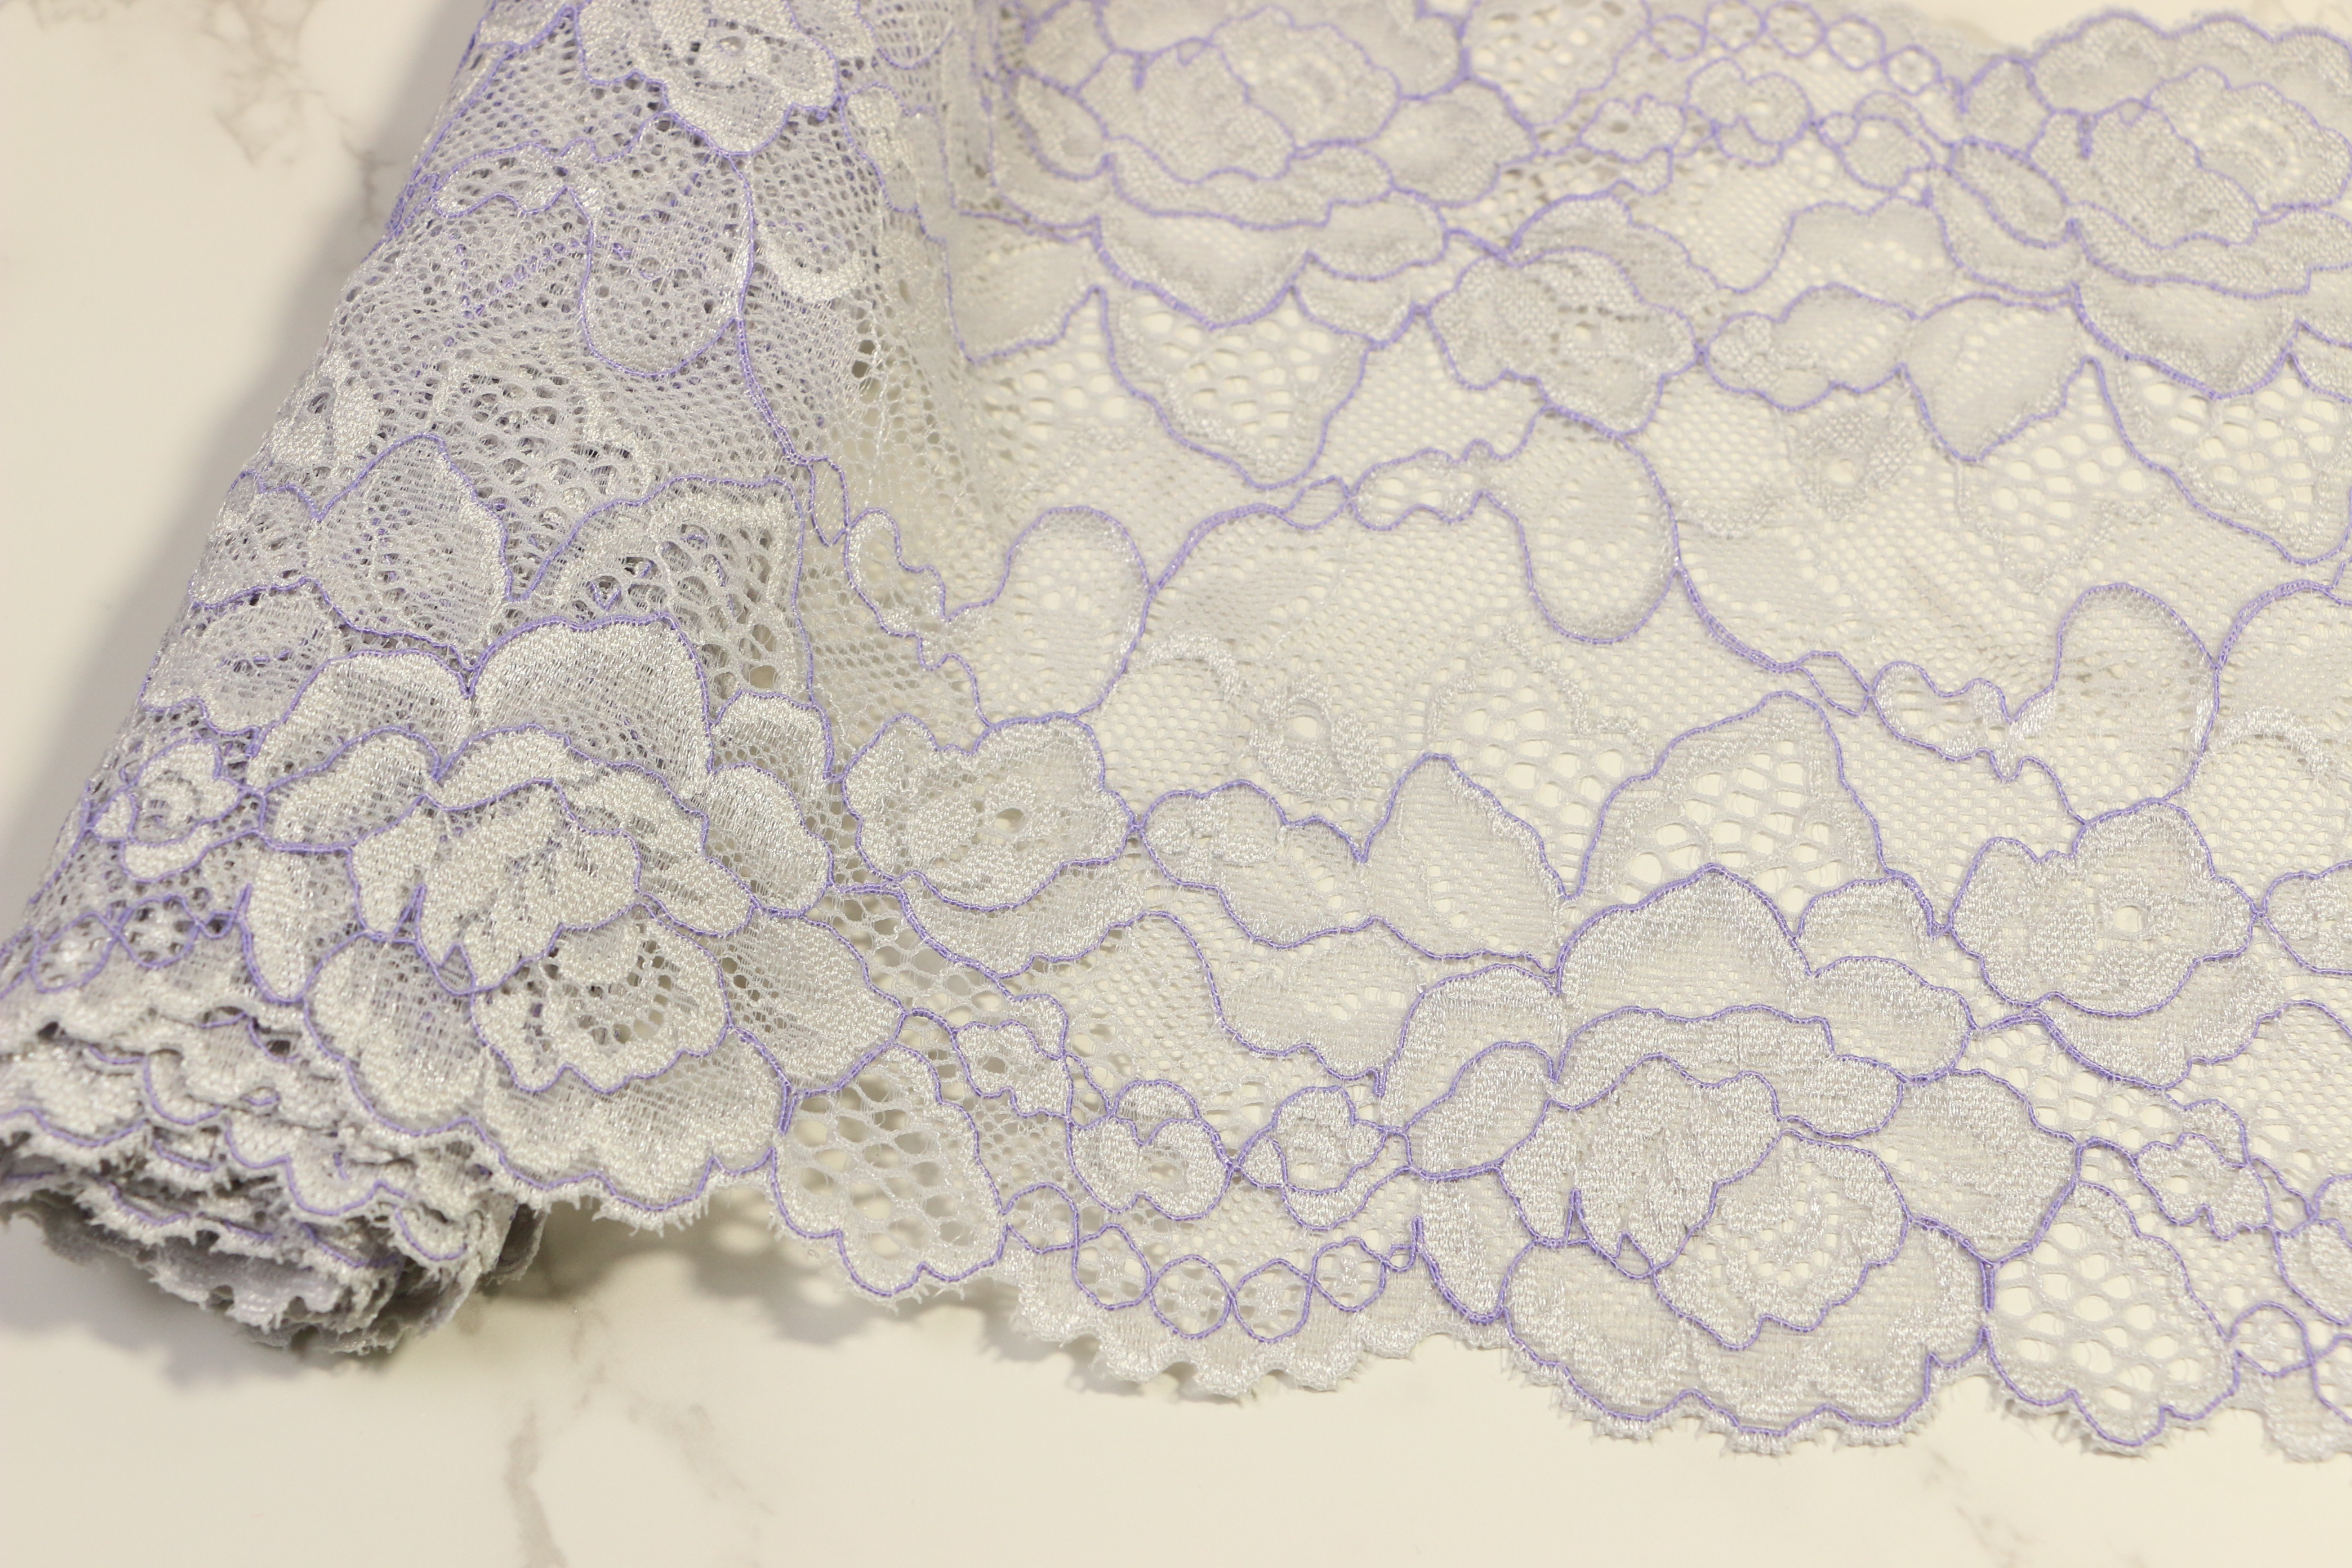  Stretch Lace Trim By The Yard Multiusage 2 tones color Flora Patterned Manufactures